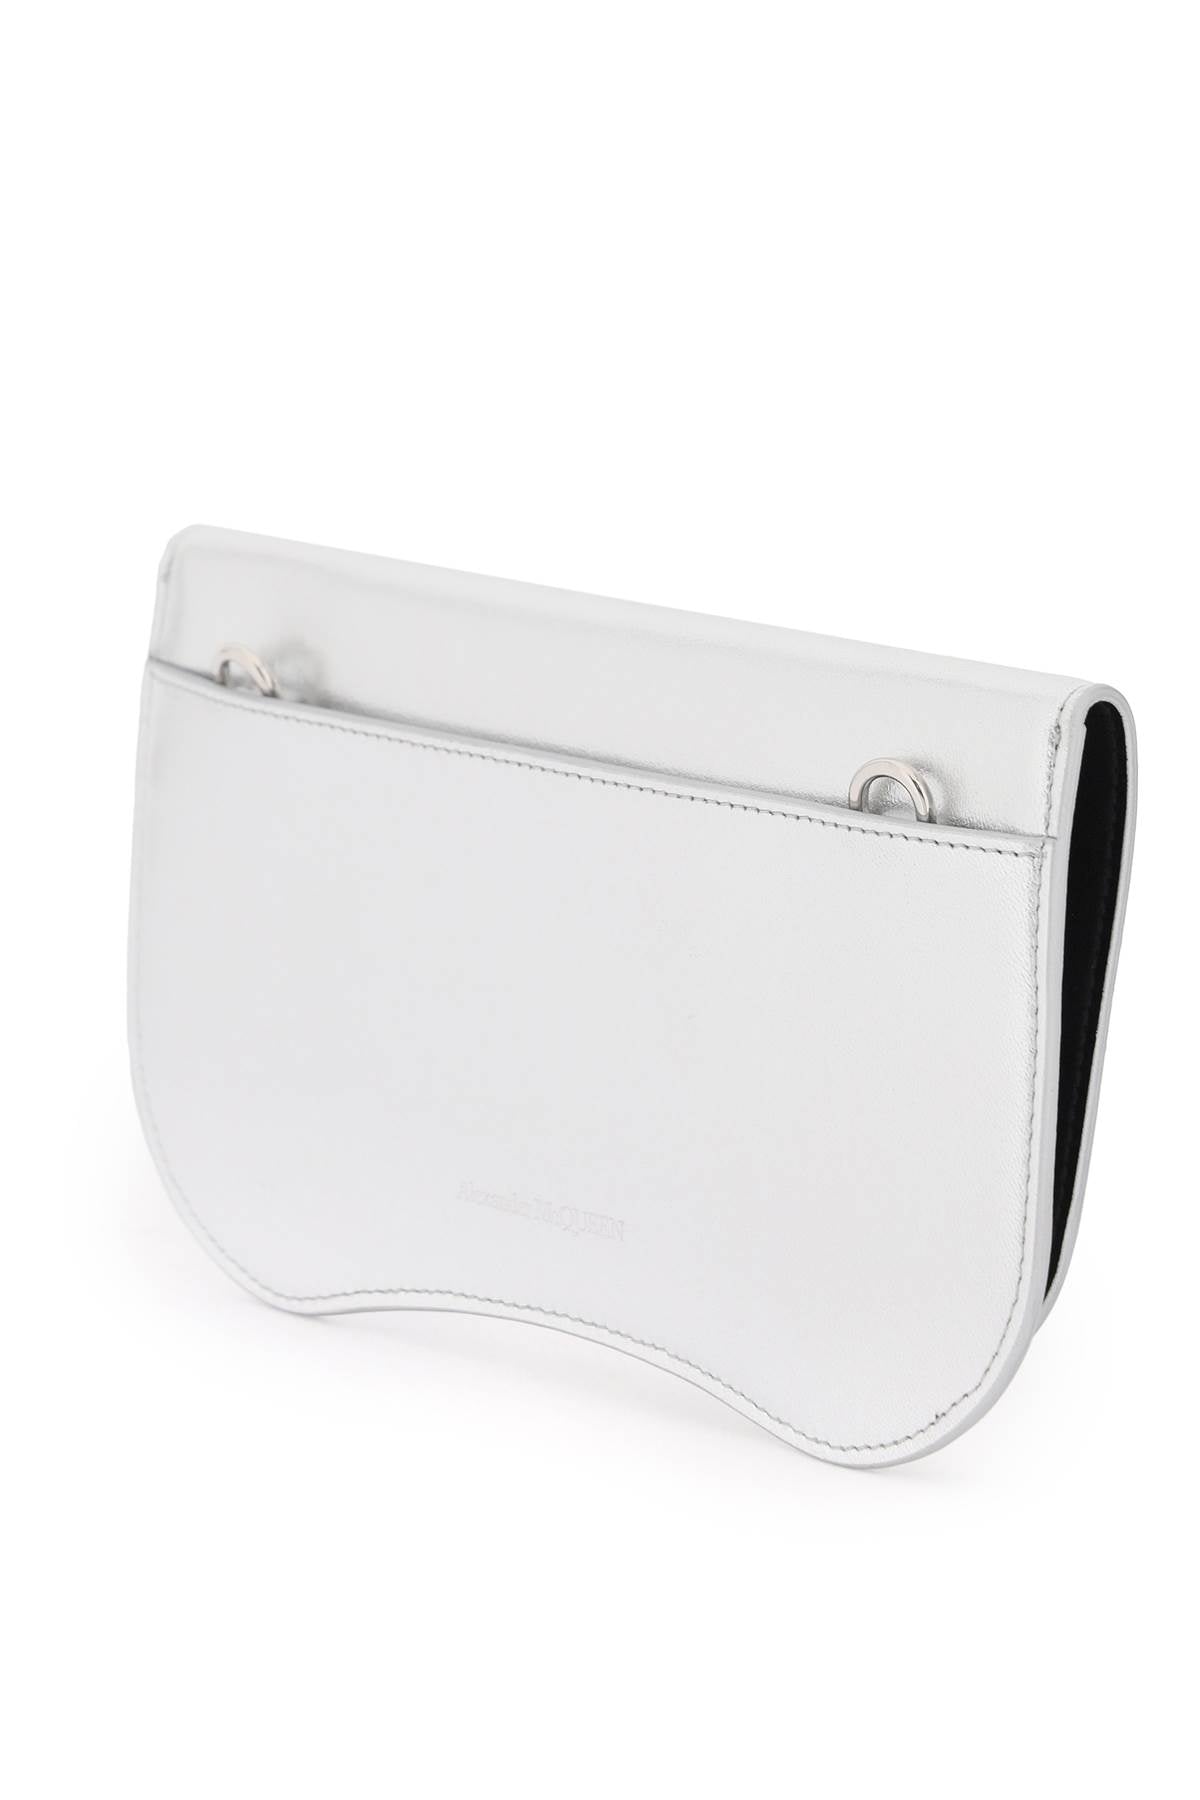 ALEXANDER MCQUEEN Sleek and Stylish Silver Laminated Leather Crossbody Pouch for Women